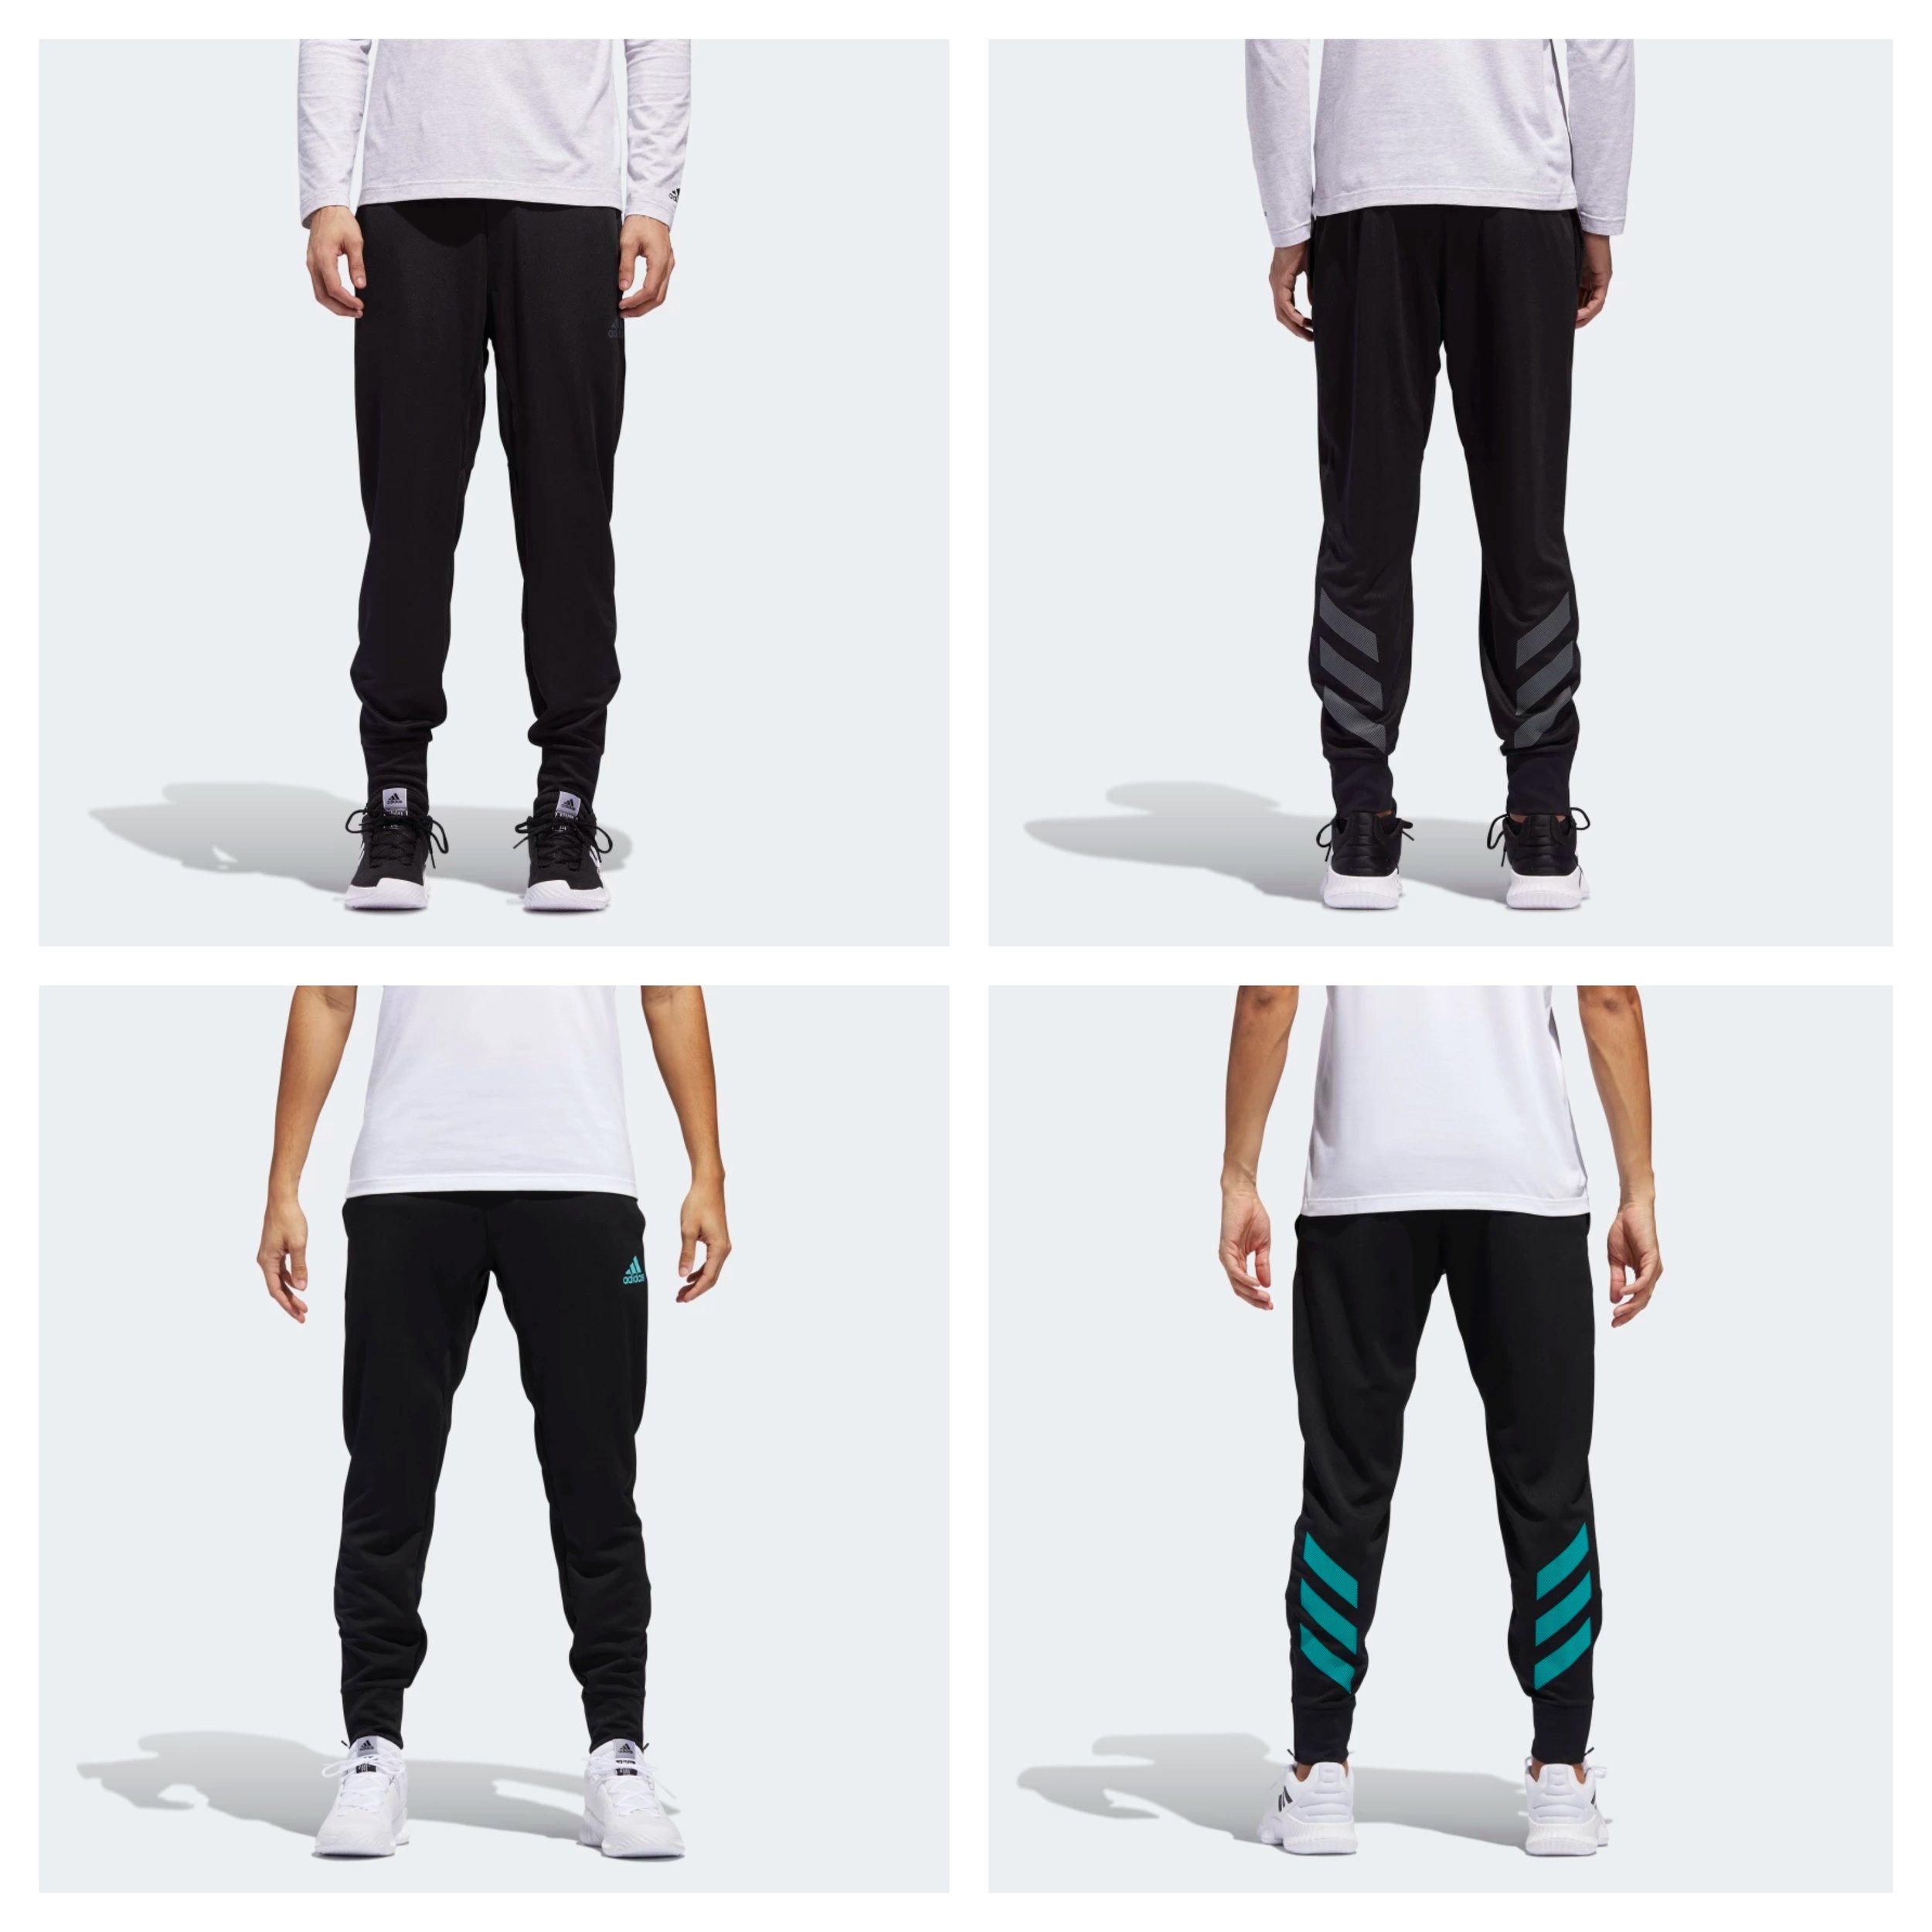 On Sale: adidas Accelerate Pants 